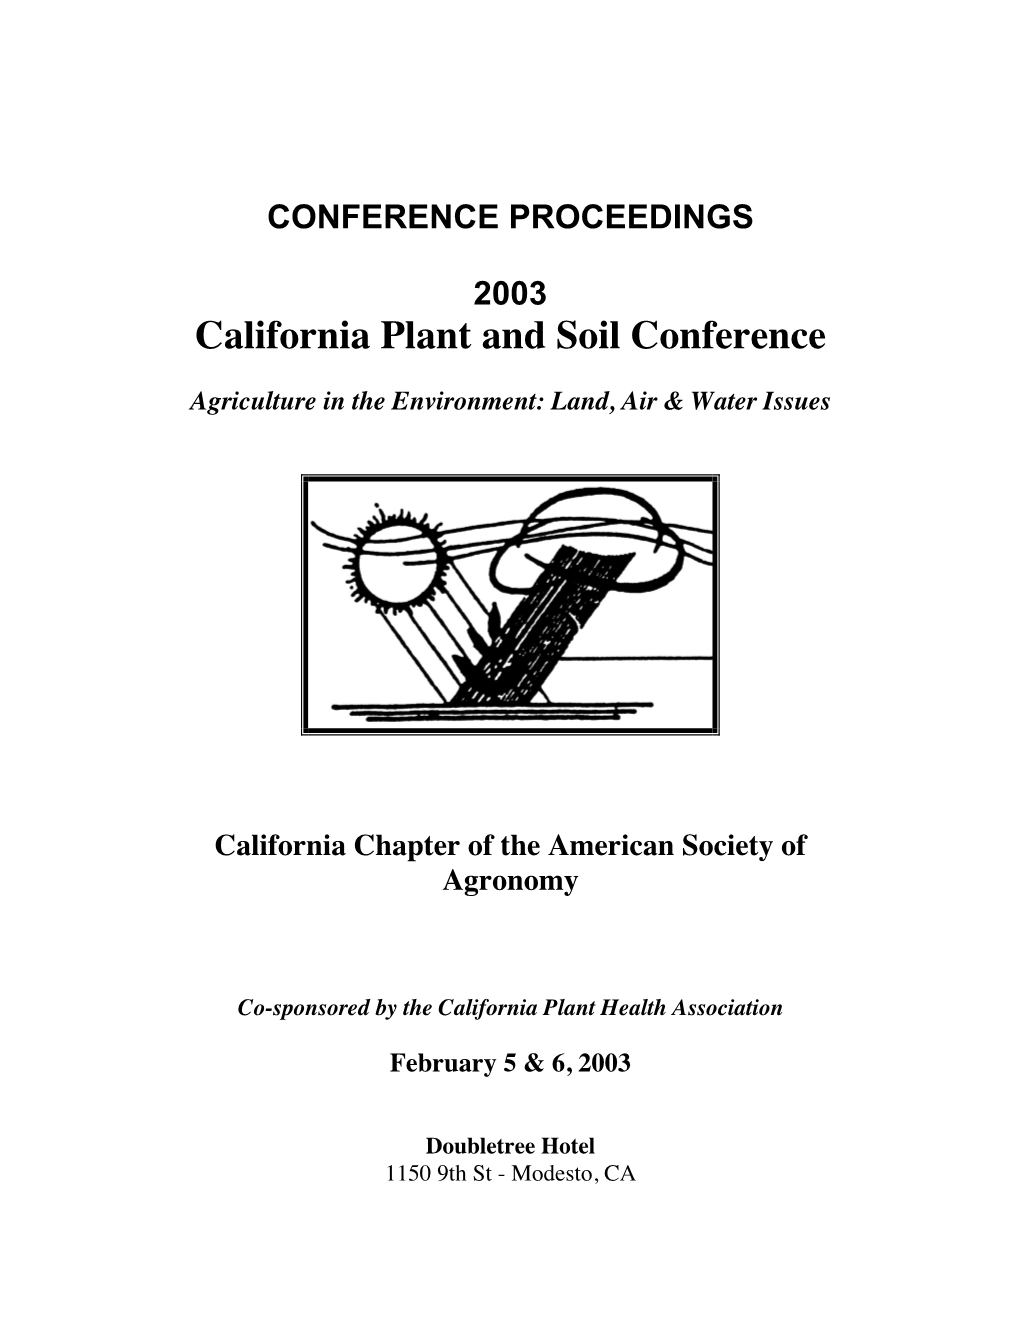 California Plant and Soil Conference